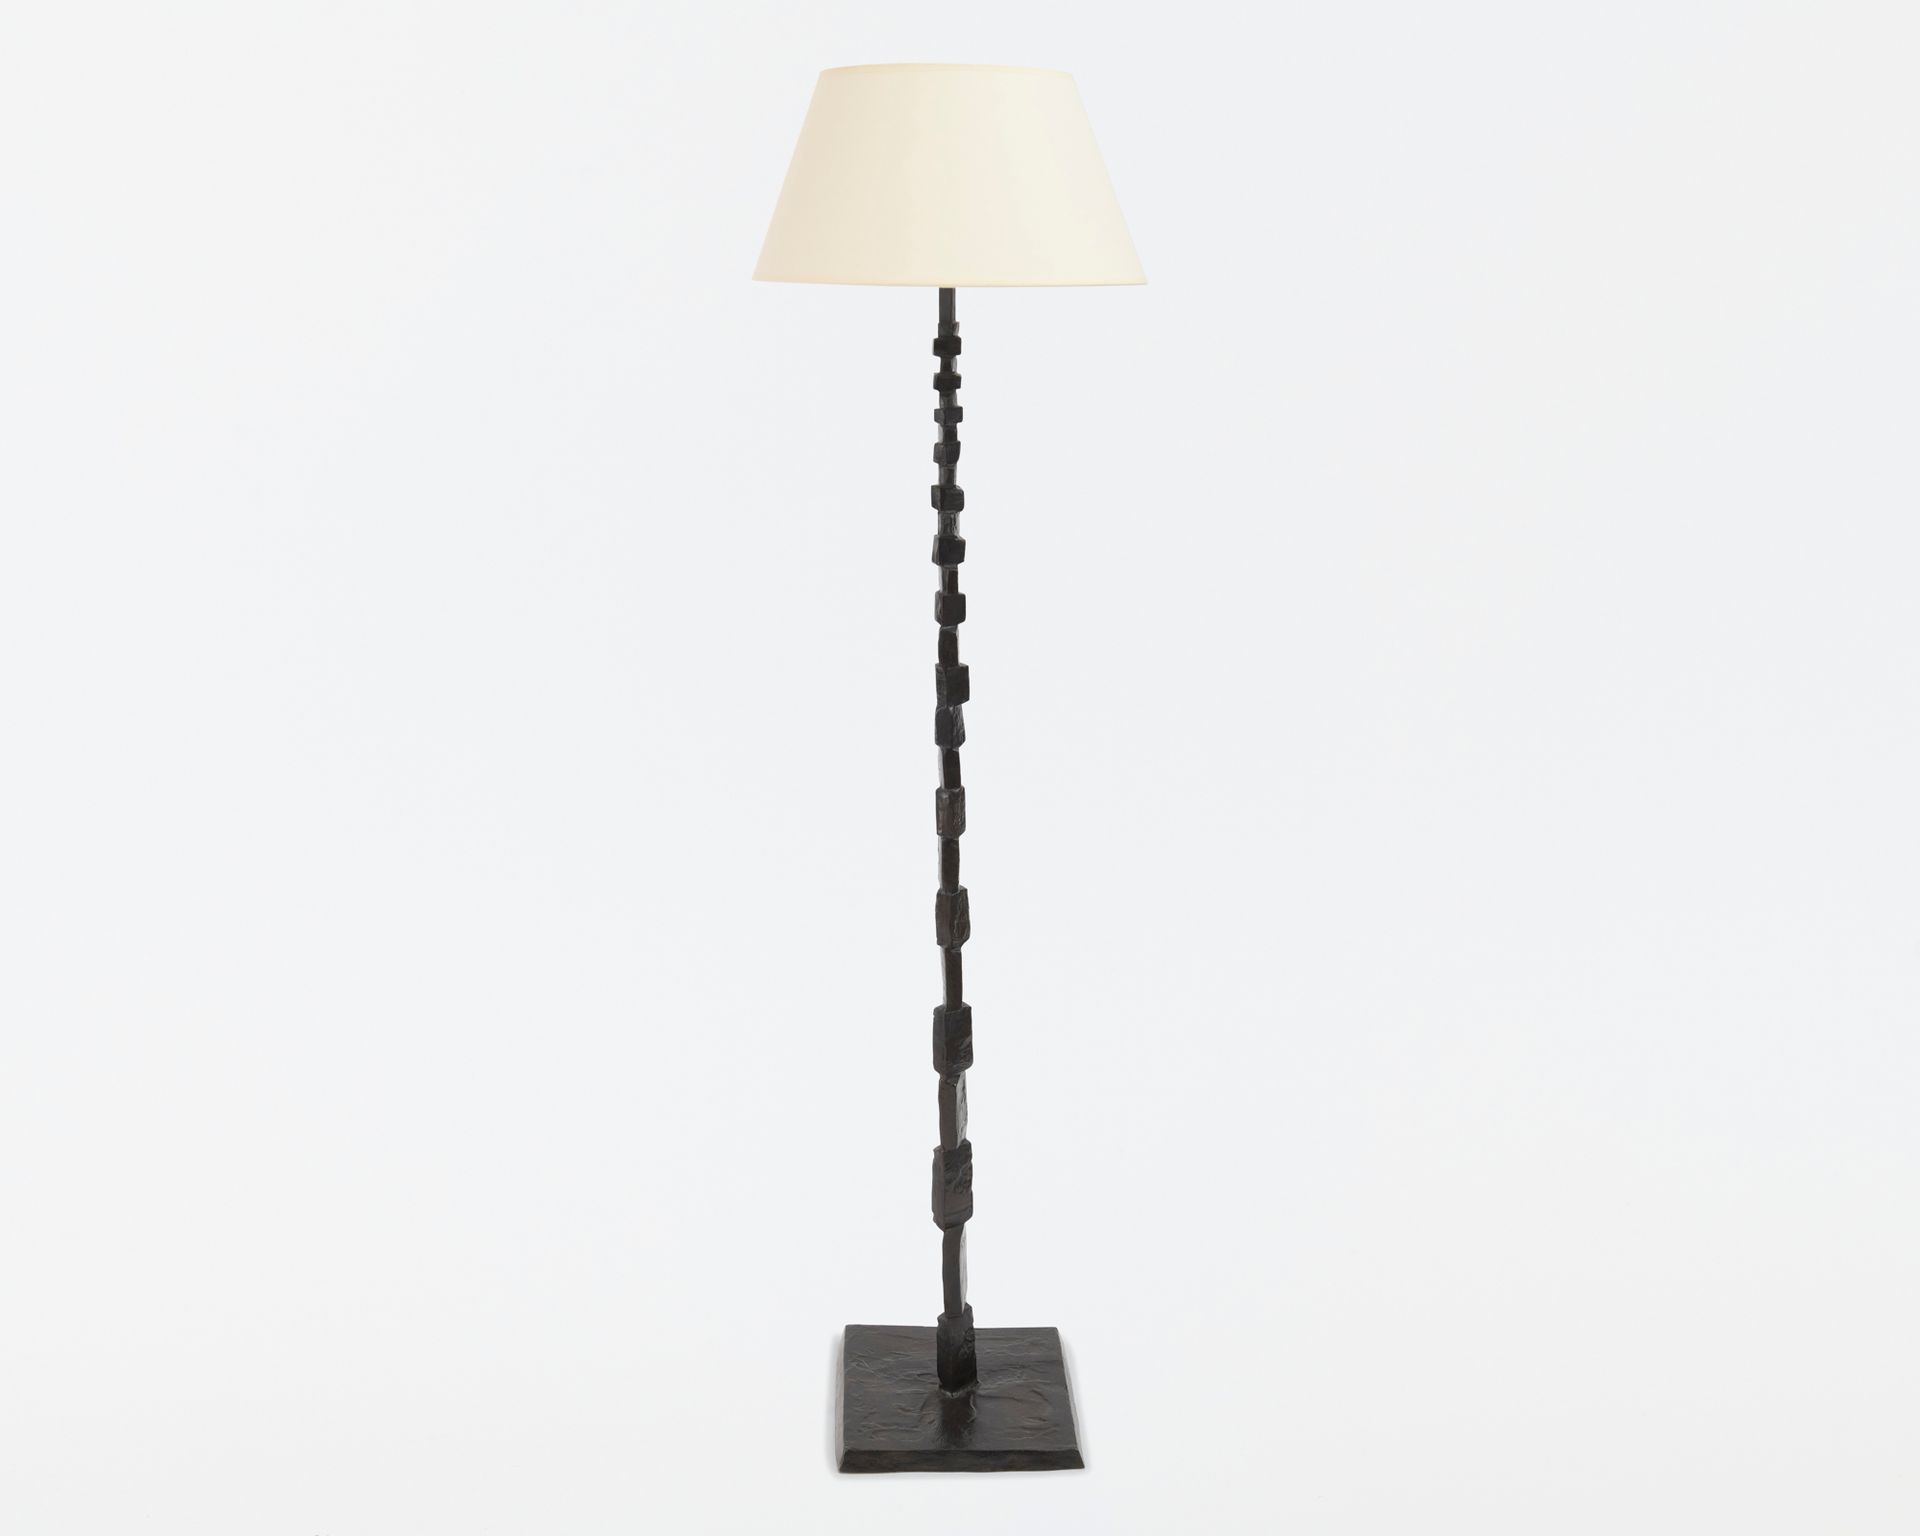 Null Column" floor lamp,
in bronze with brown patina. It is
consists of a cuboid&hellip;